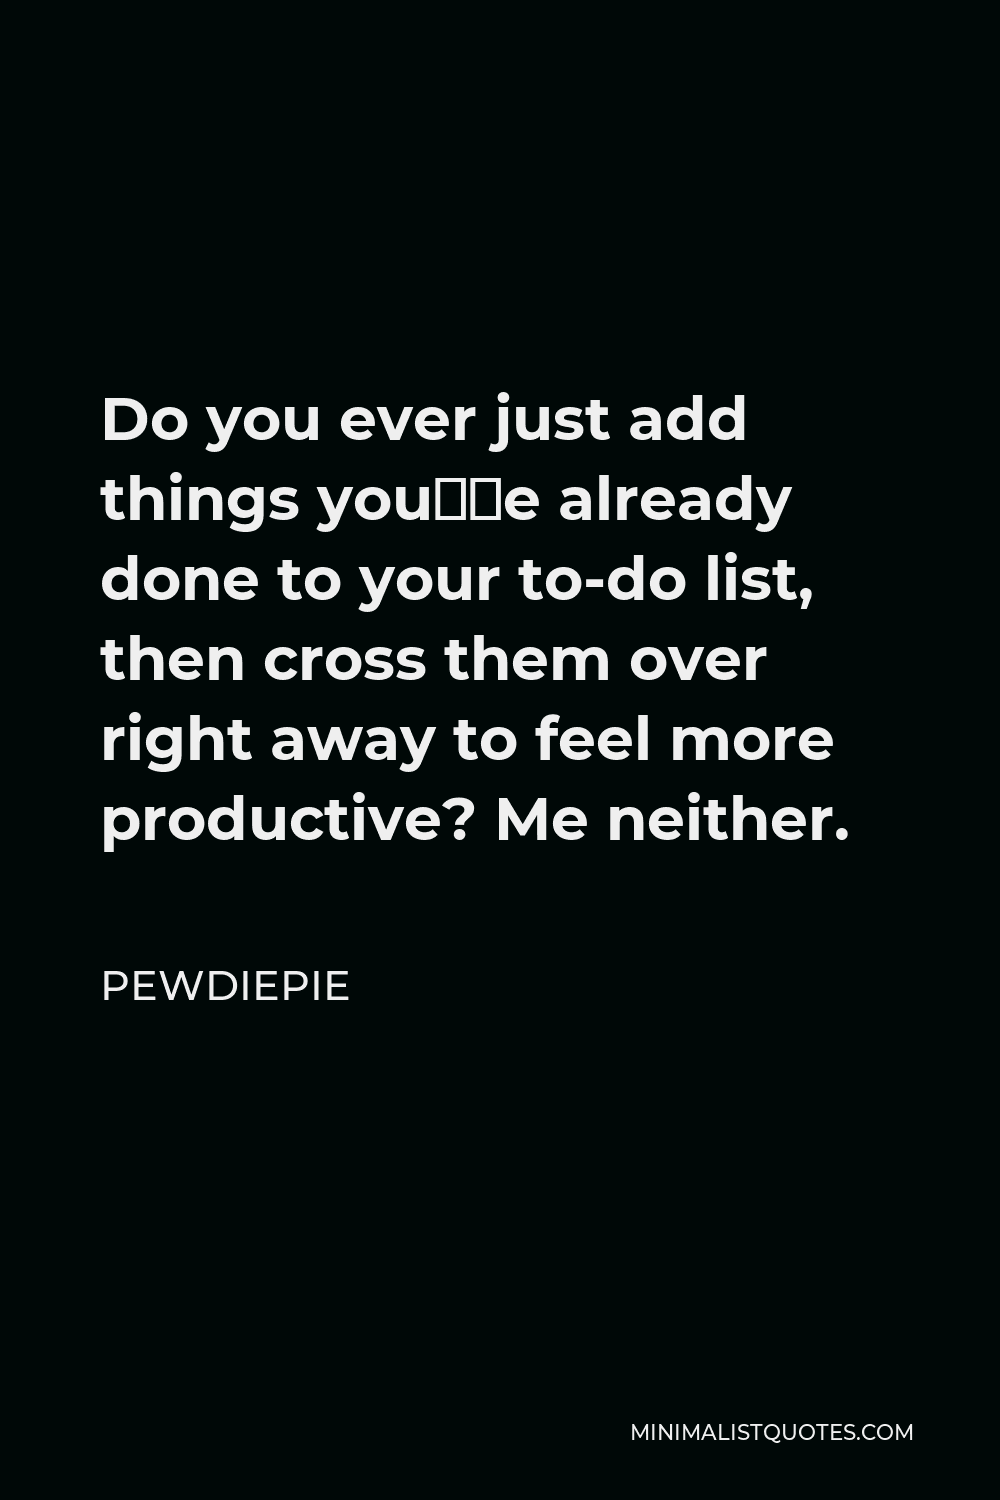 PewDiePie Quote - Do you ever just add things you’ve already done to your to-do list, then cross them over right away to feel more productive? Me neither.